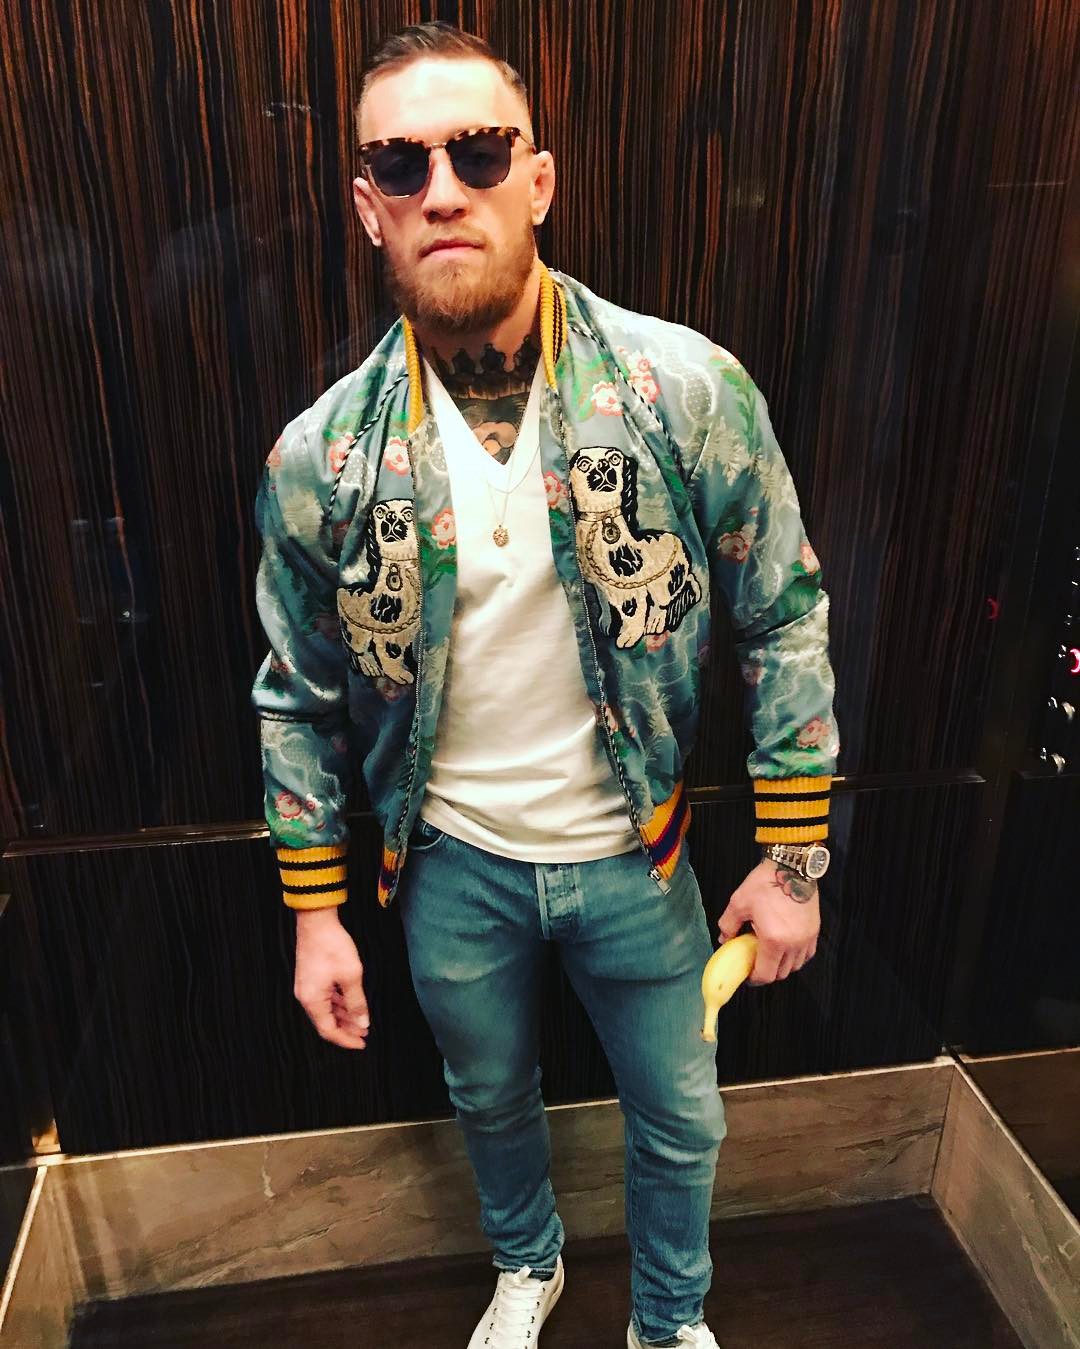 SPOTTED: Conor McGregor in Gucci Bomber Jacket